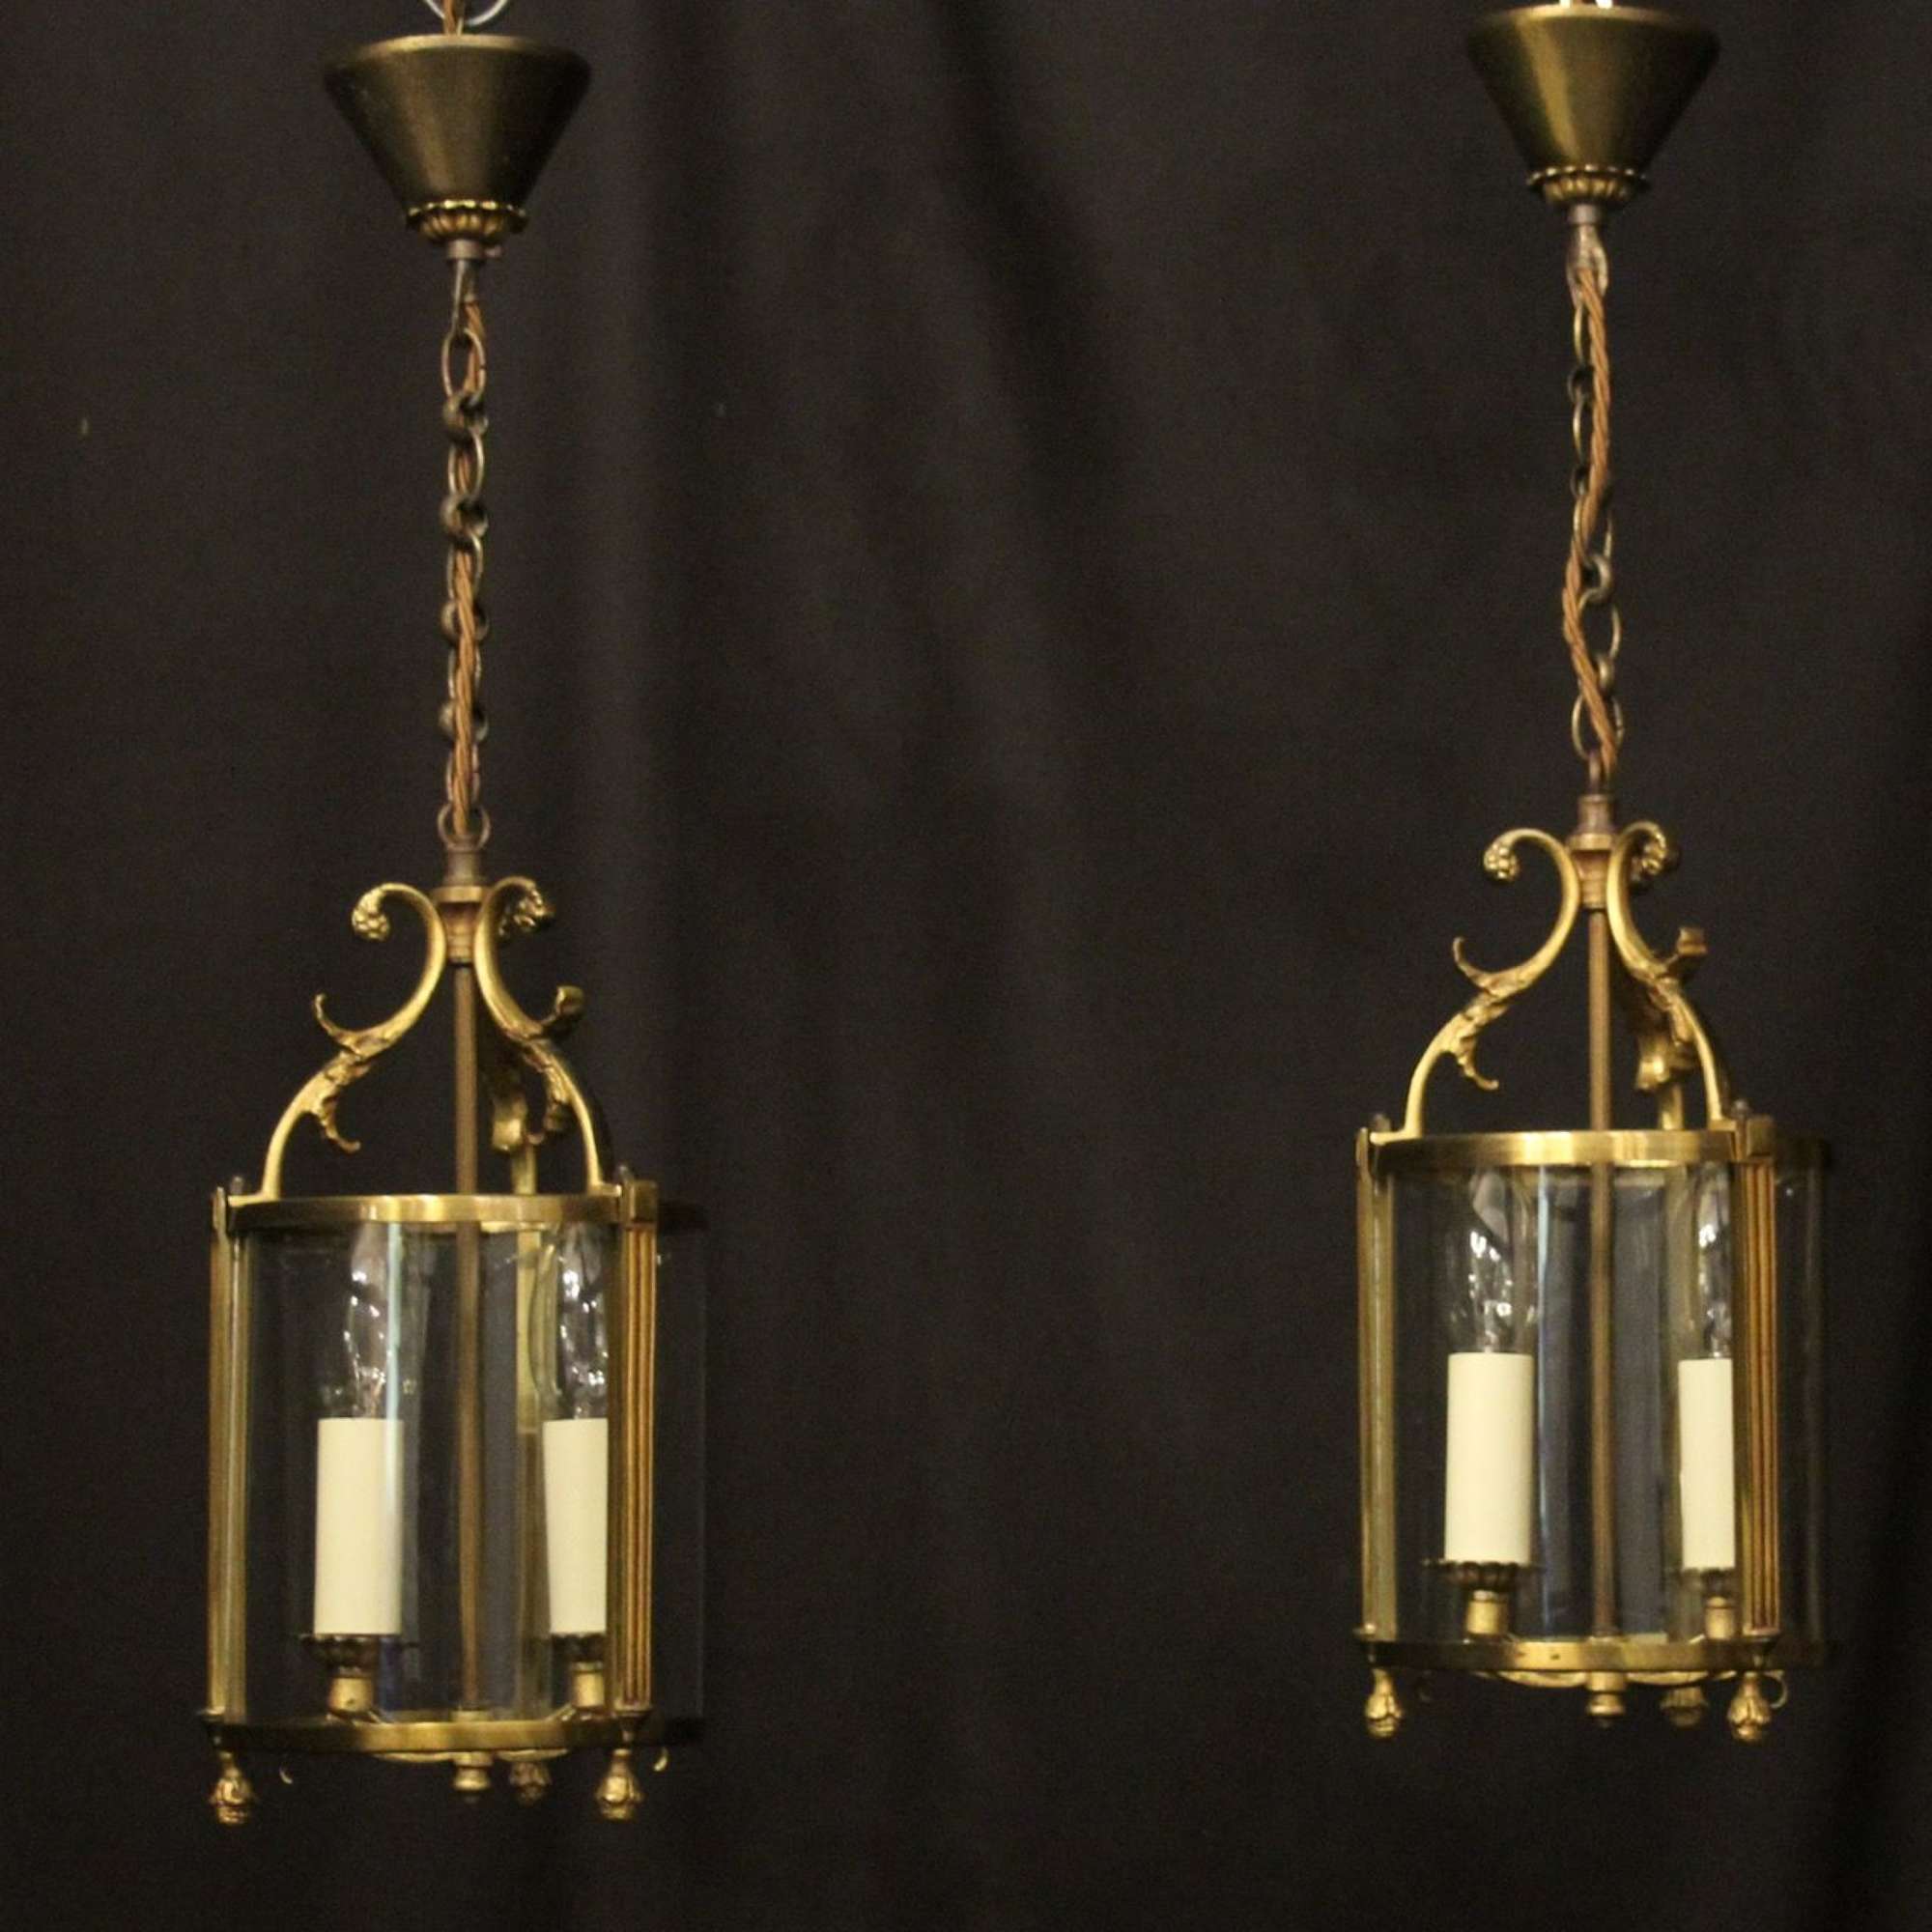 French Pair Of Gilded Convex Hall Lanterns